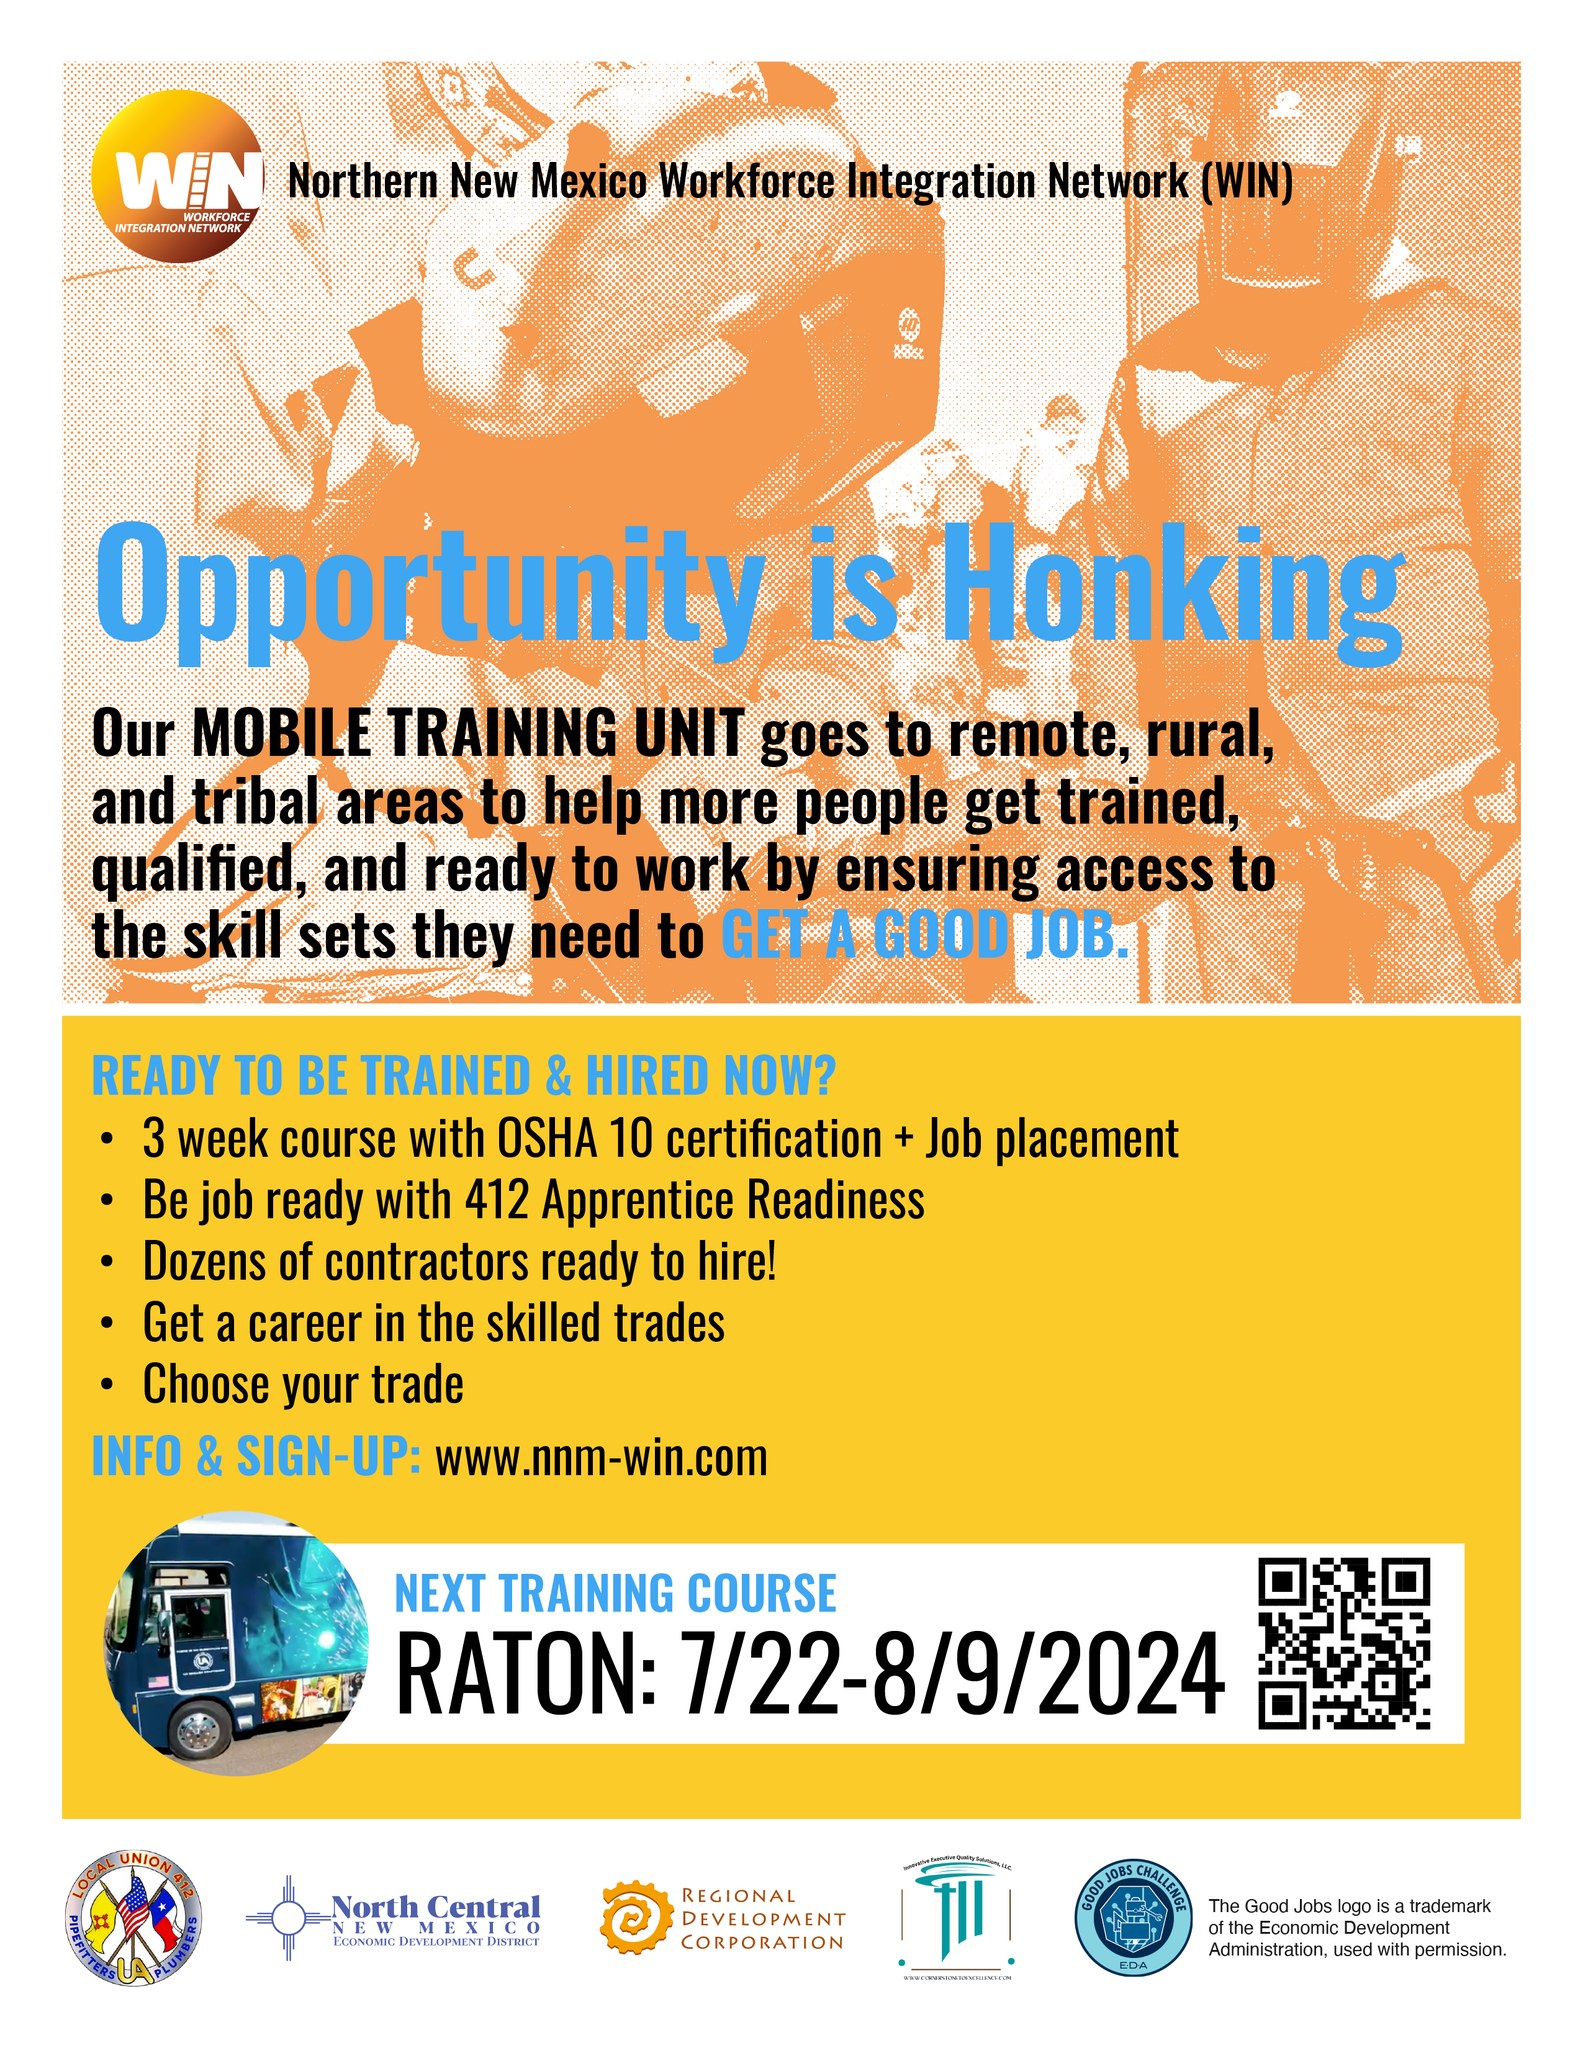 Northern New Mexico Workforce Integration Network Mobile Training Unit Coming to Raton